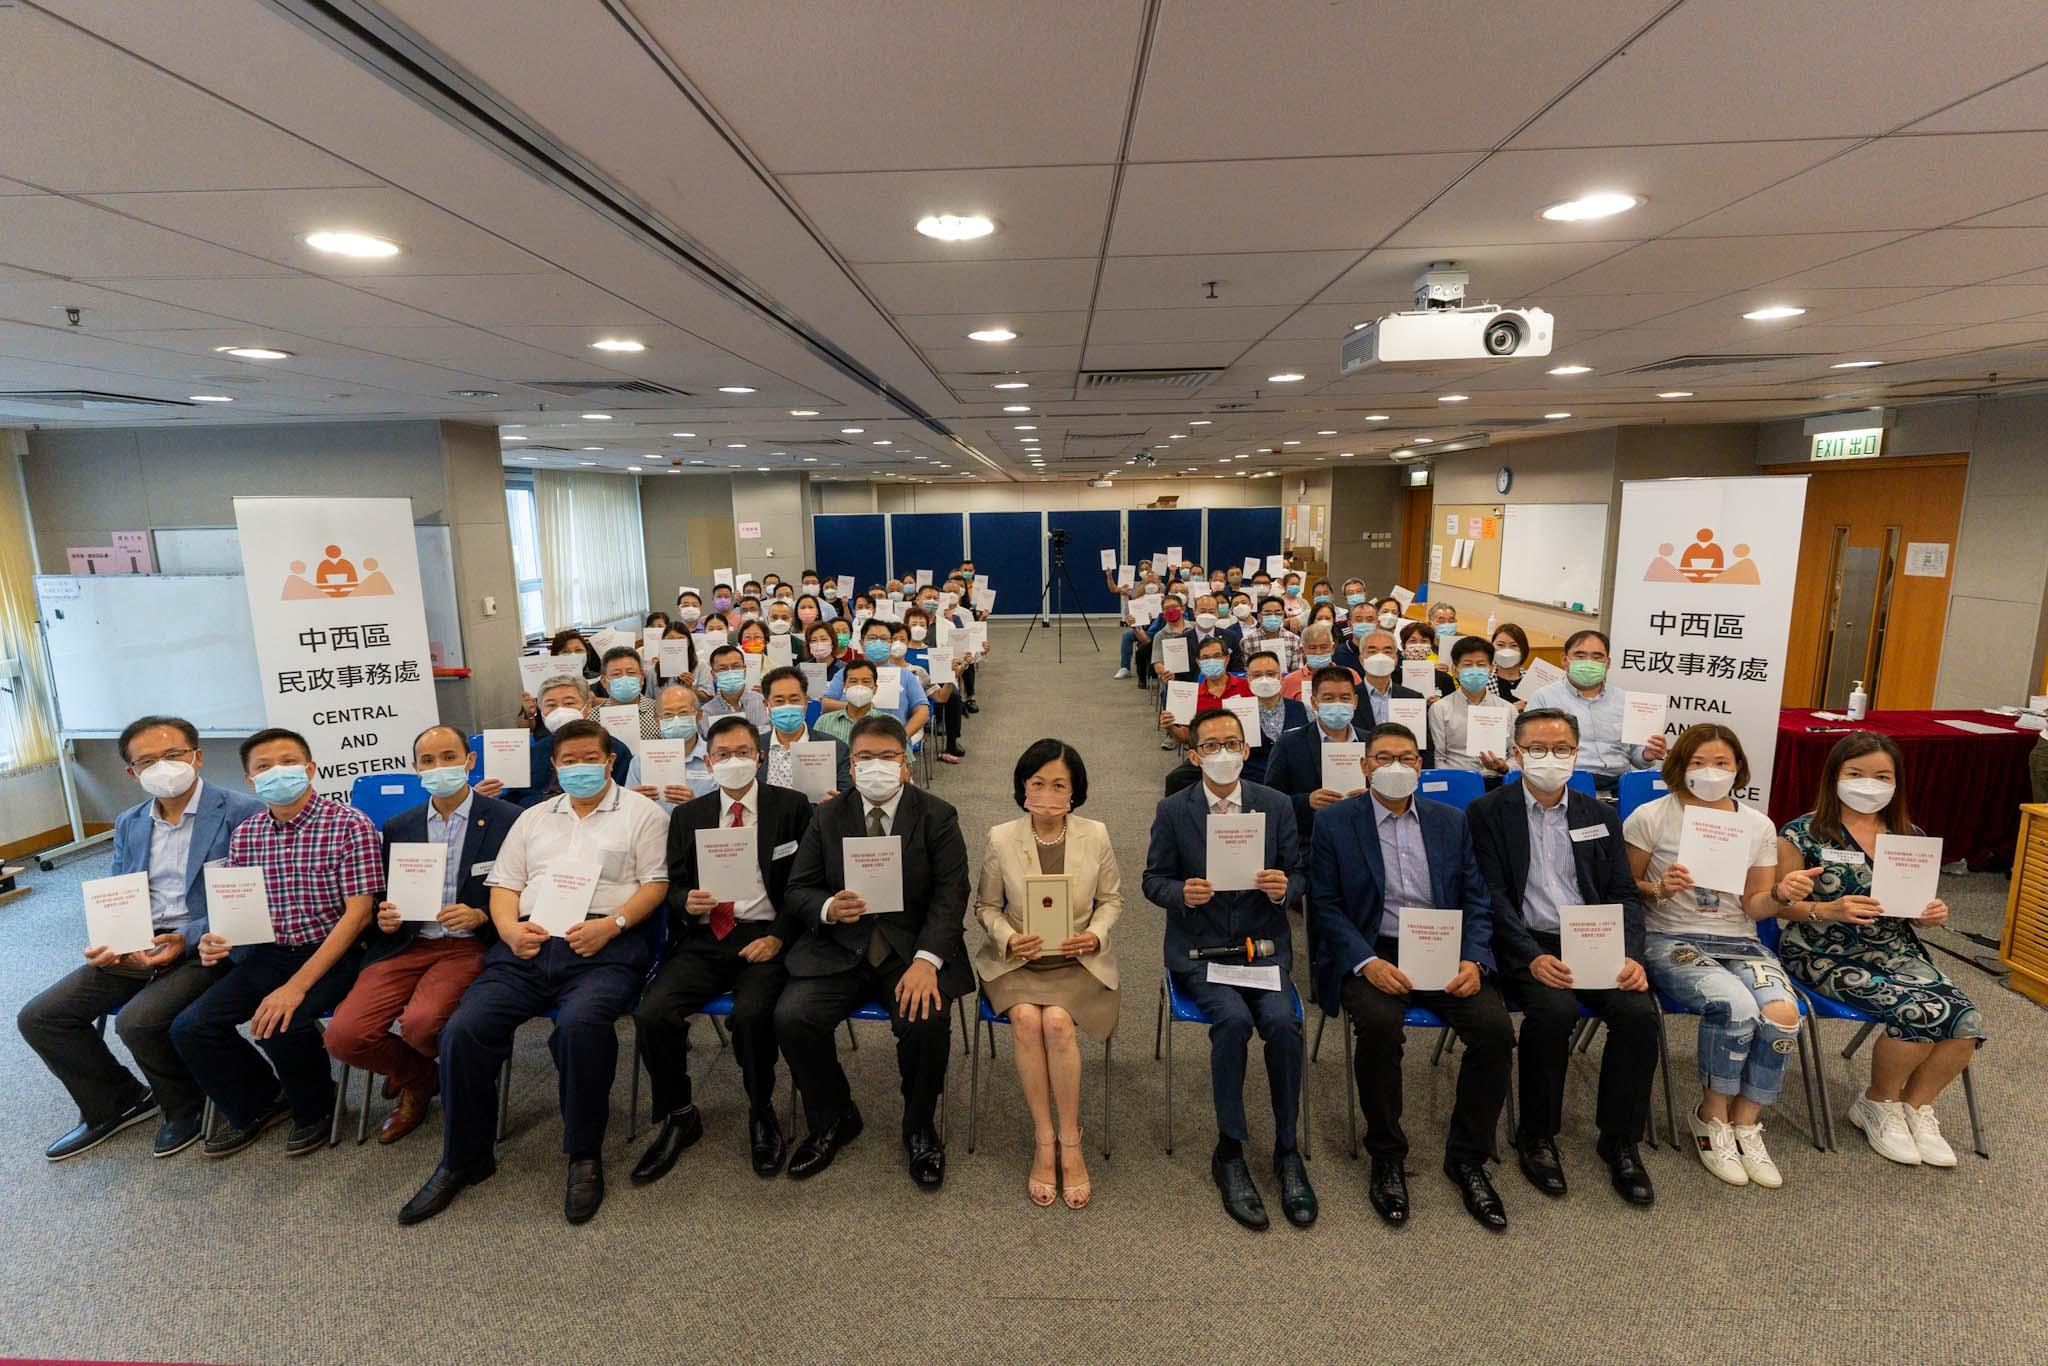 The Central and Western District Office today (August 8) held "Session to Learn About the Spirit of President Xi's Important Speech" at Kennedy Town Community Complex. Photo shows the District Officer (Central and Western), Mr David Leung (front row, sixth left), and Convenor of the Executive Council and Member of the Legislative Council Mrs Regina Ip (front row, sixth right), together with representatives from various business and commercial associations of Central and Western District.